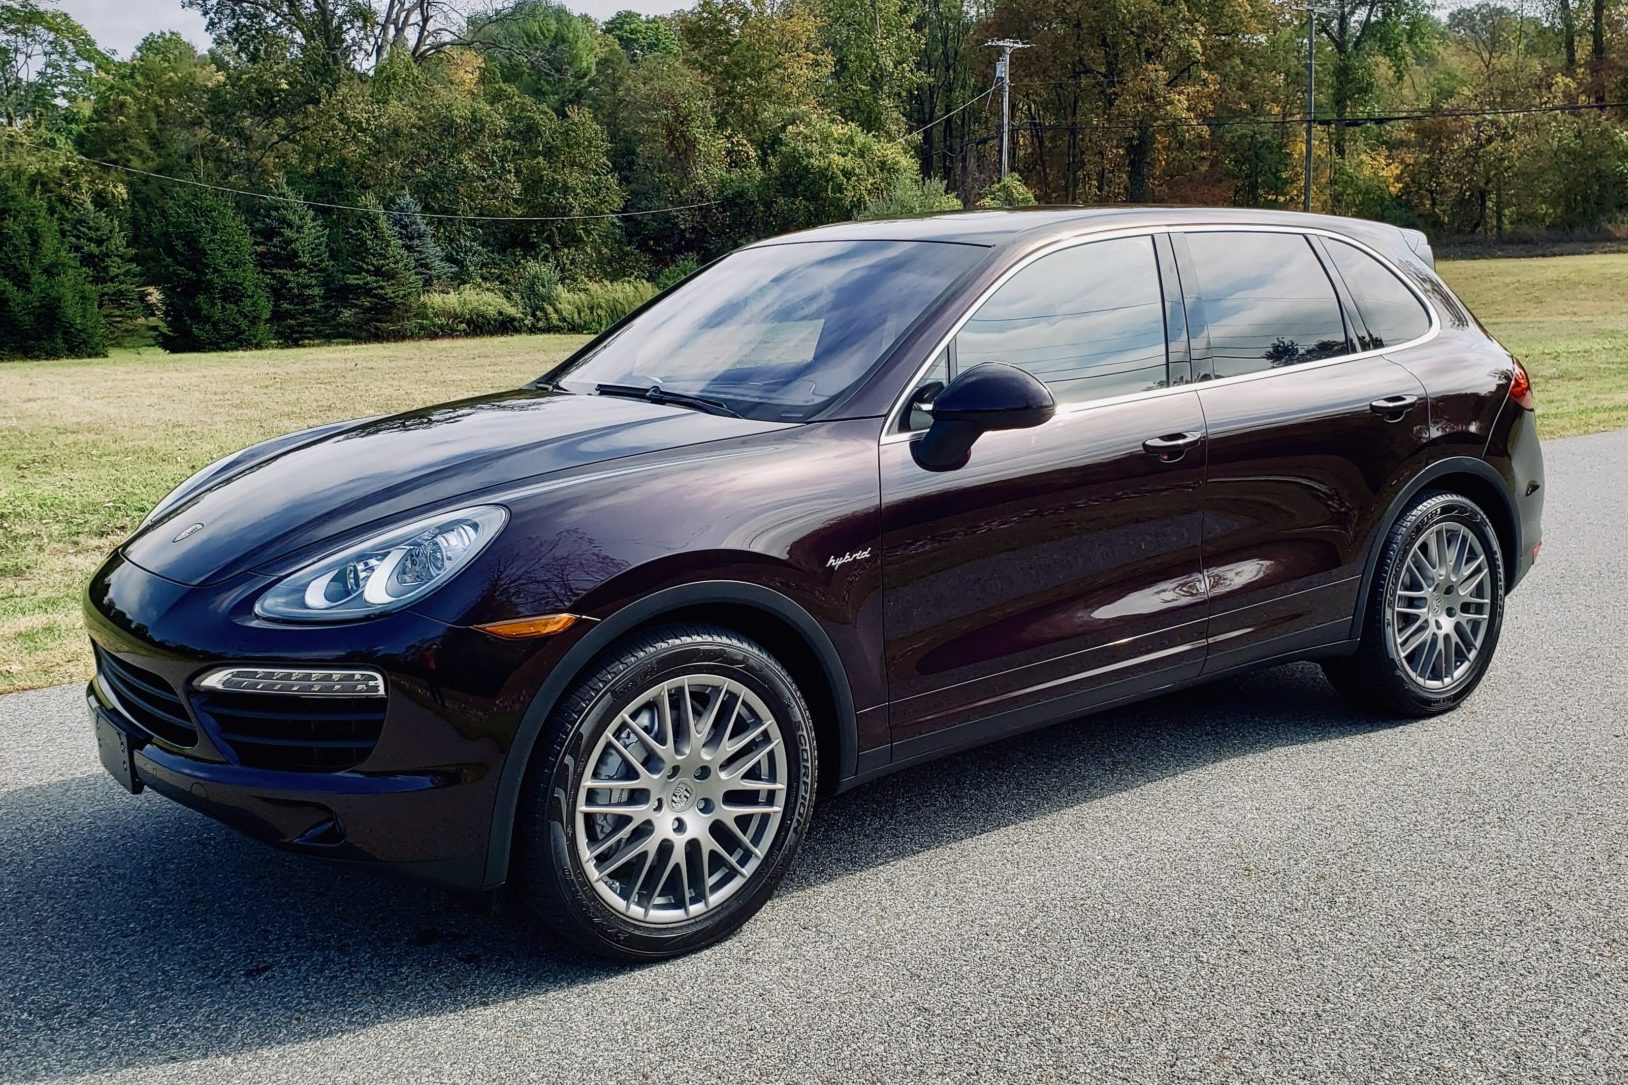 No Reserve: 2011 Porsche Cayenne S Hybrid for sale on BaT Auctions - sold  for $27,750 on October 15, 2019 (Lot #23,970) | Bring a Trailer